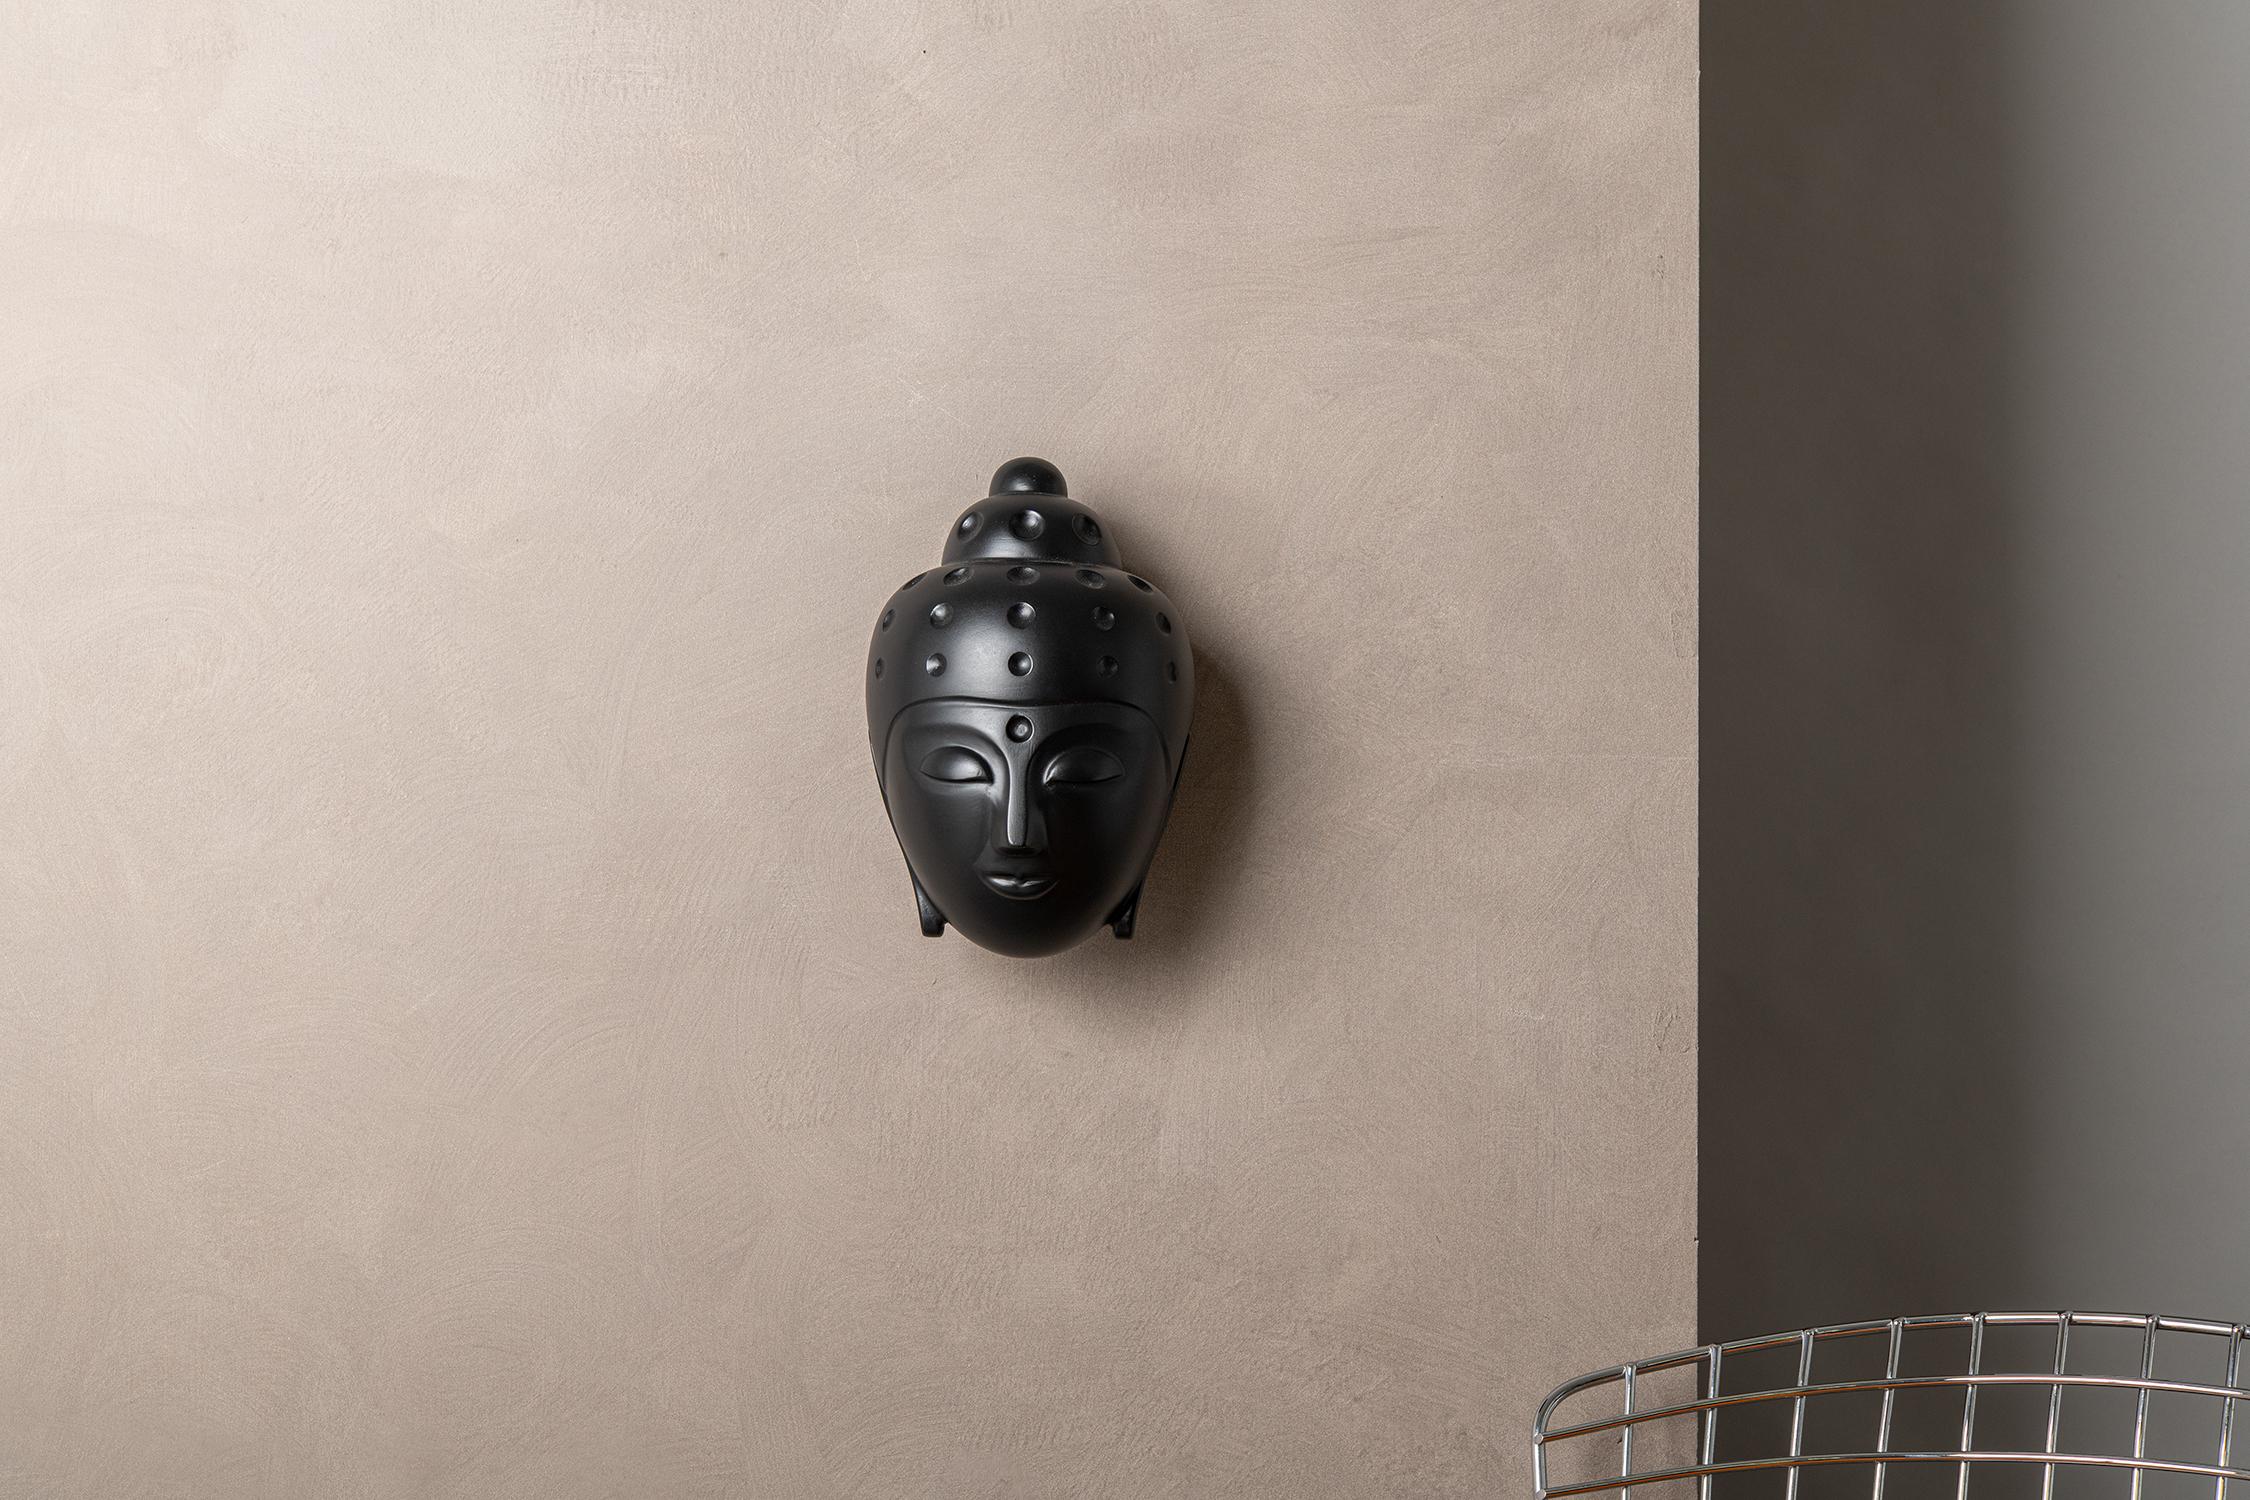 This Buddha head sculpture is a 3D print contemporary take on the traditional Buddha image.
The statue can be hanged directly on the wall.
It is a limited edition of 25 pieces.
The statute can be custom made in different colors and sizes.
The Buddha